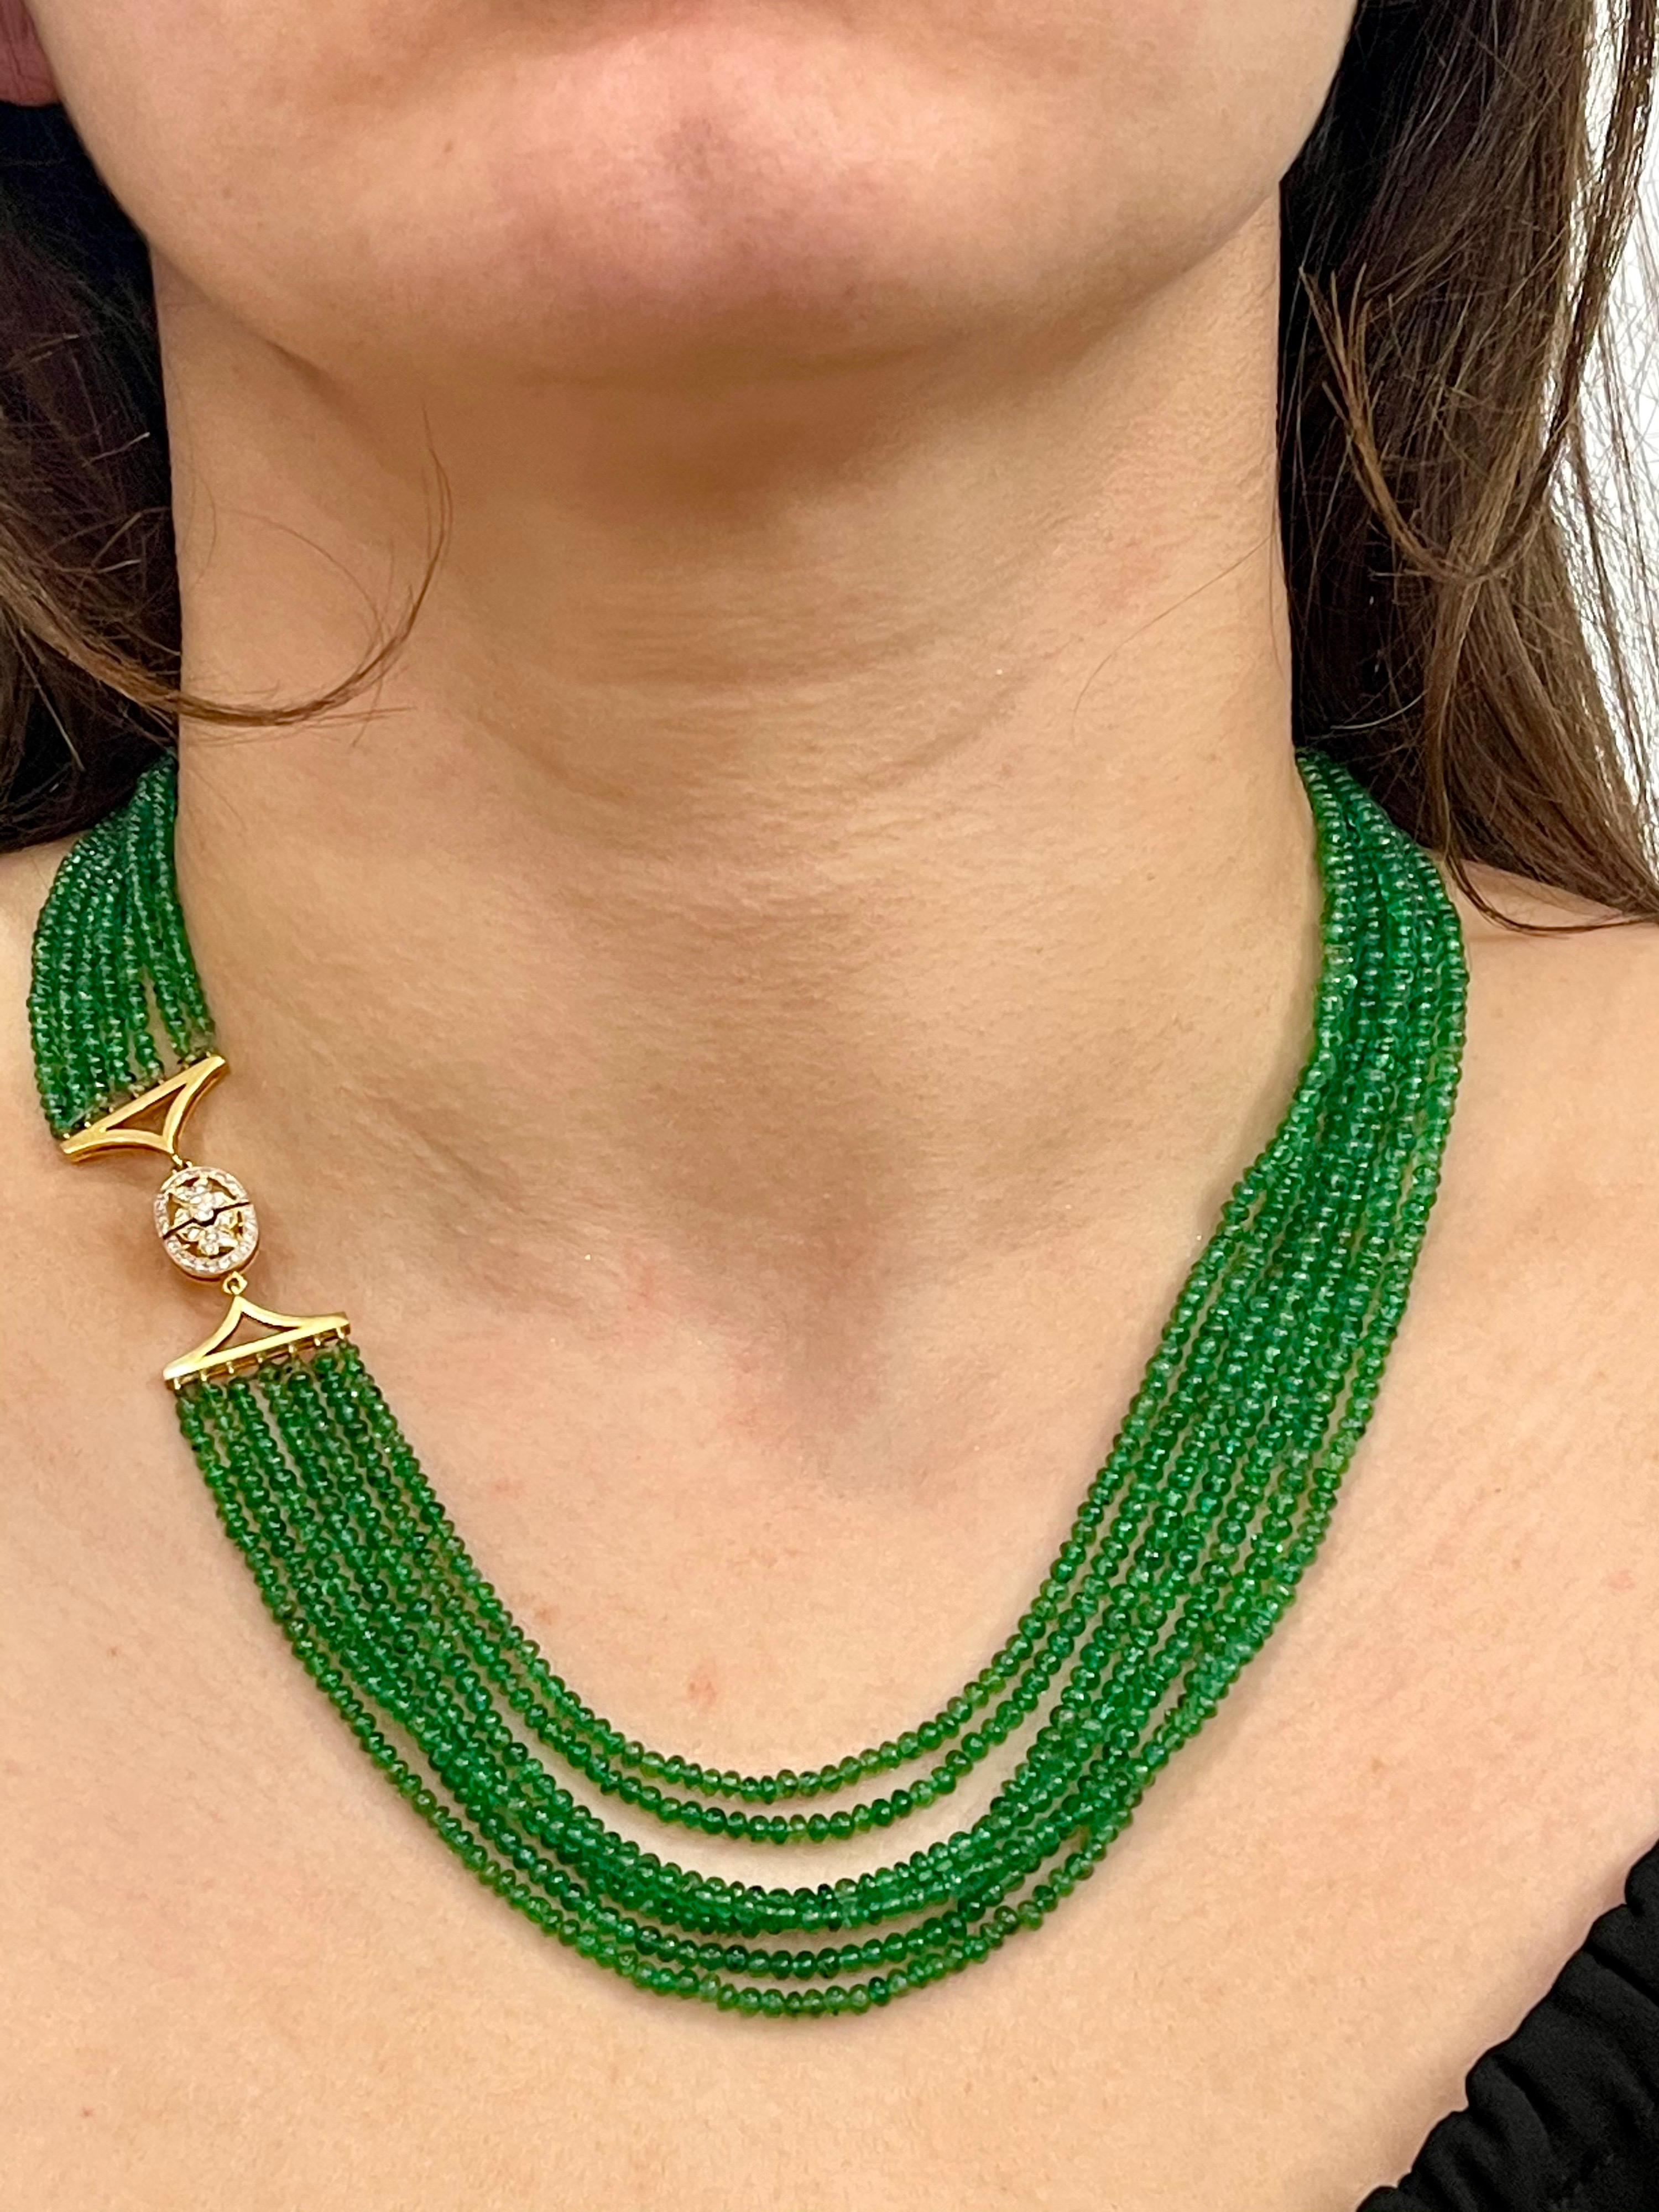 200 Carat Emerald Beads 7 Line Necklace with Diamond Clasp 18 Karat Yellow Gold For Sale 12